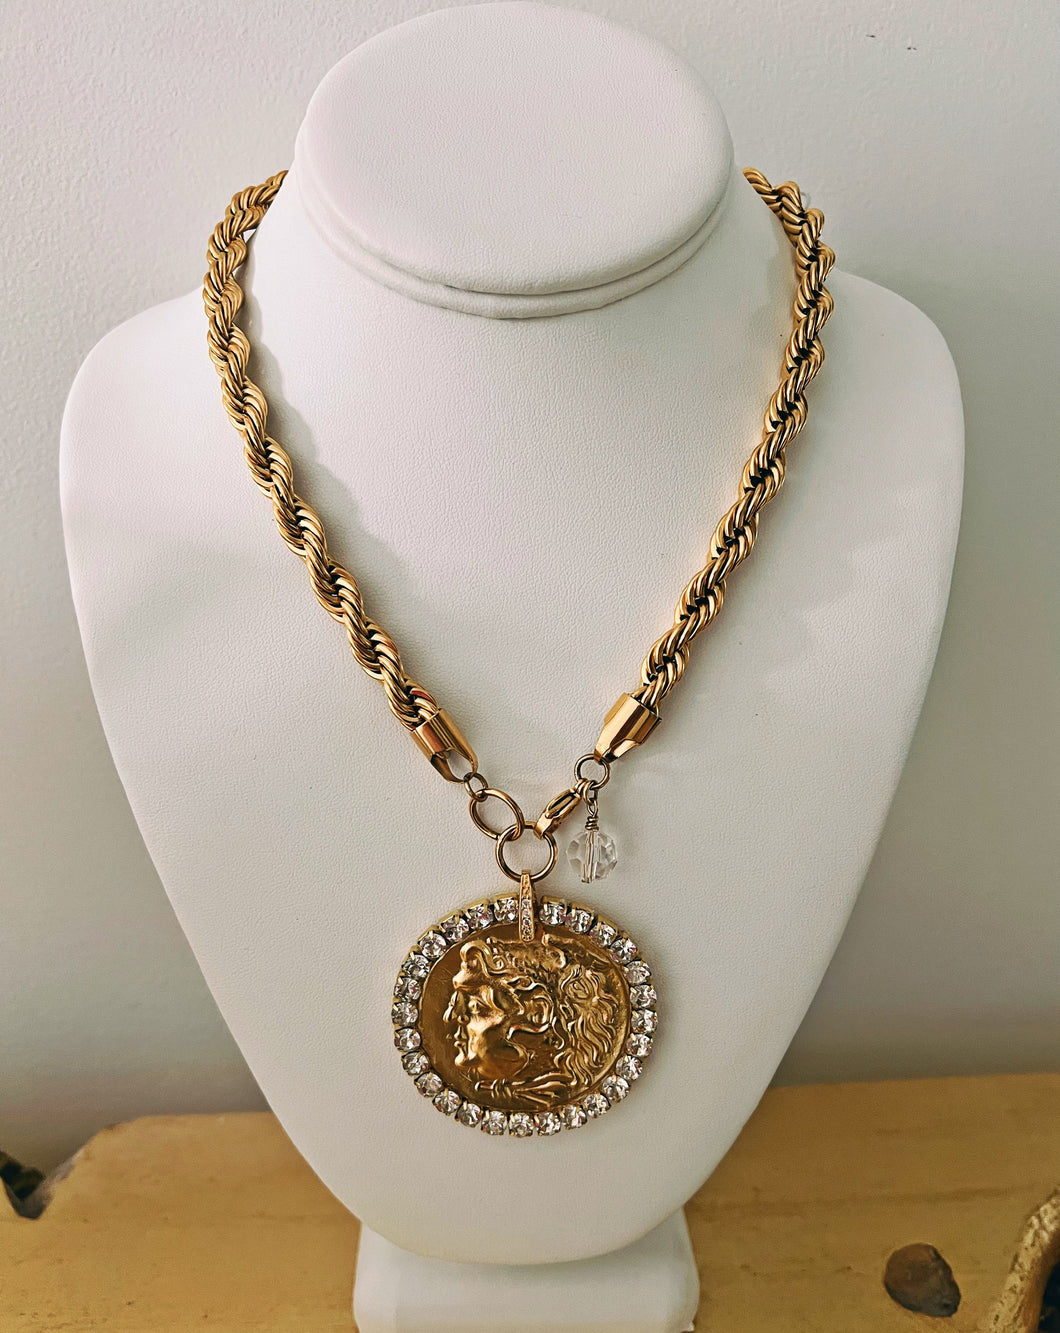 The Brielle Coin Statement Necklace